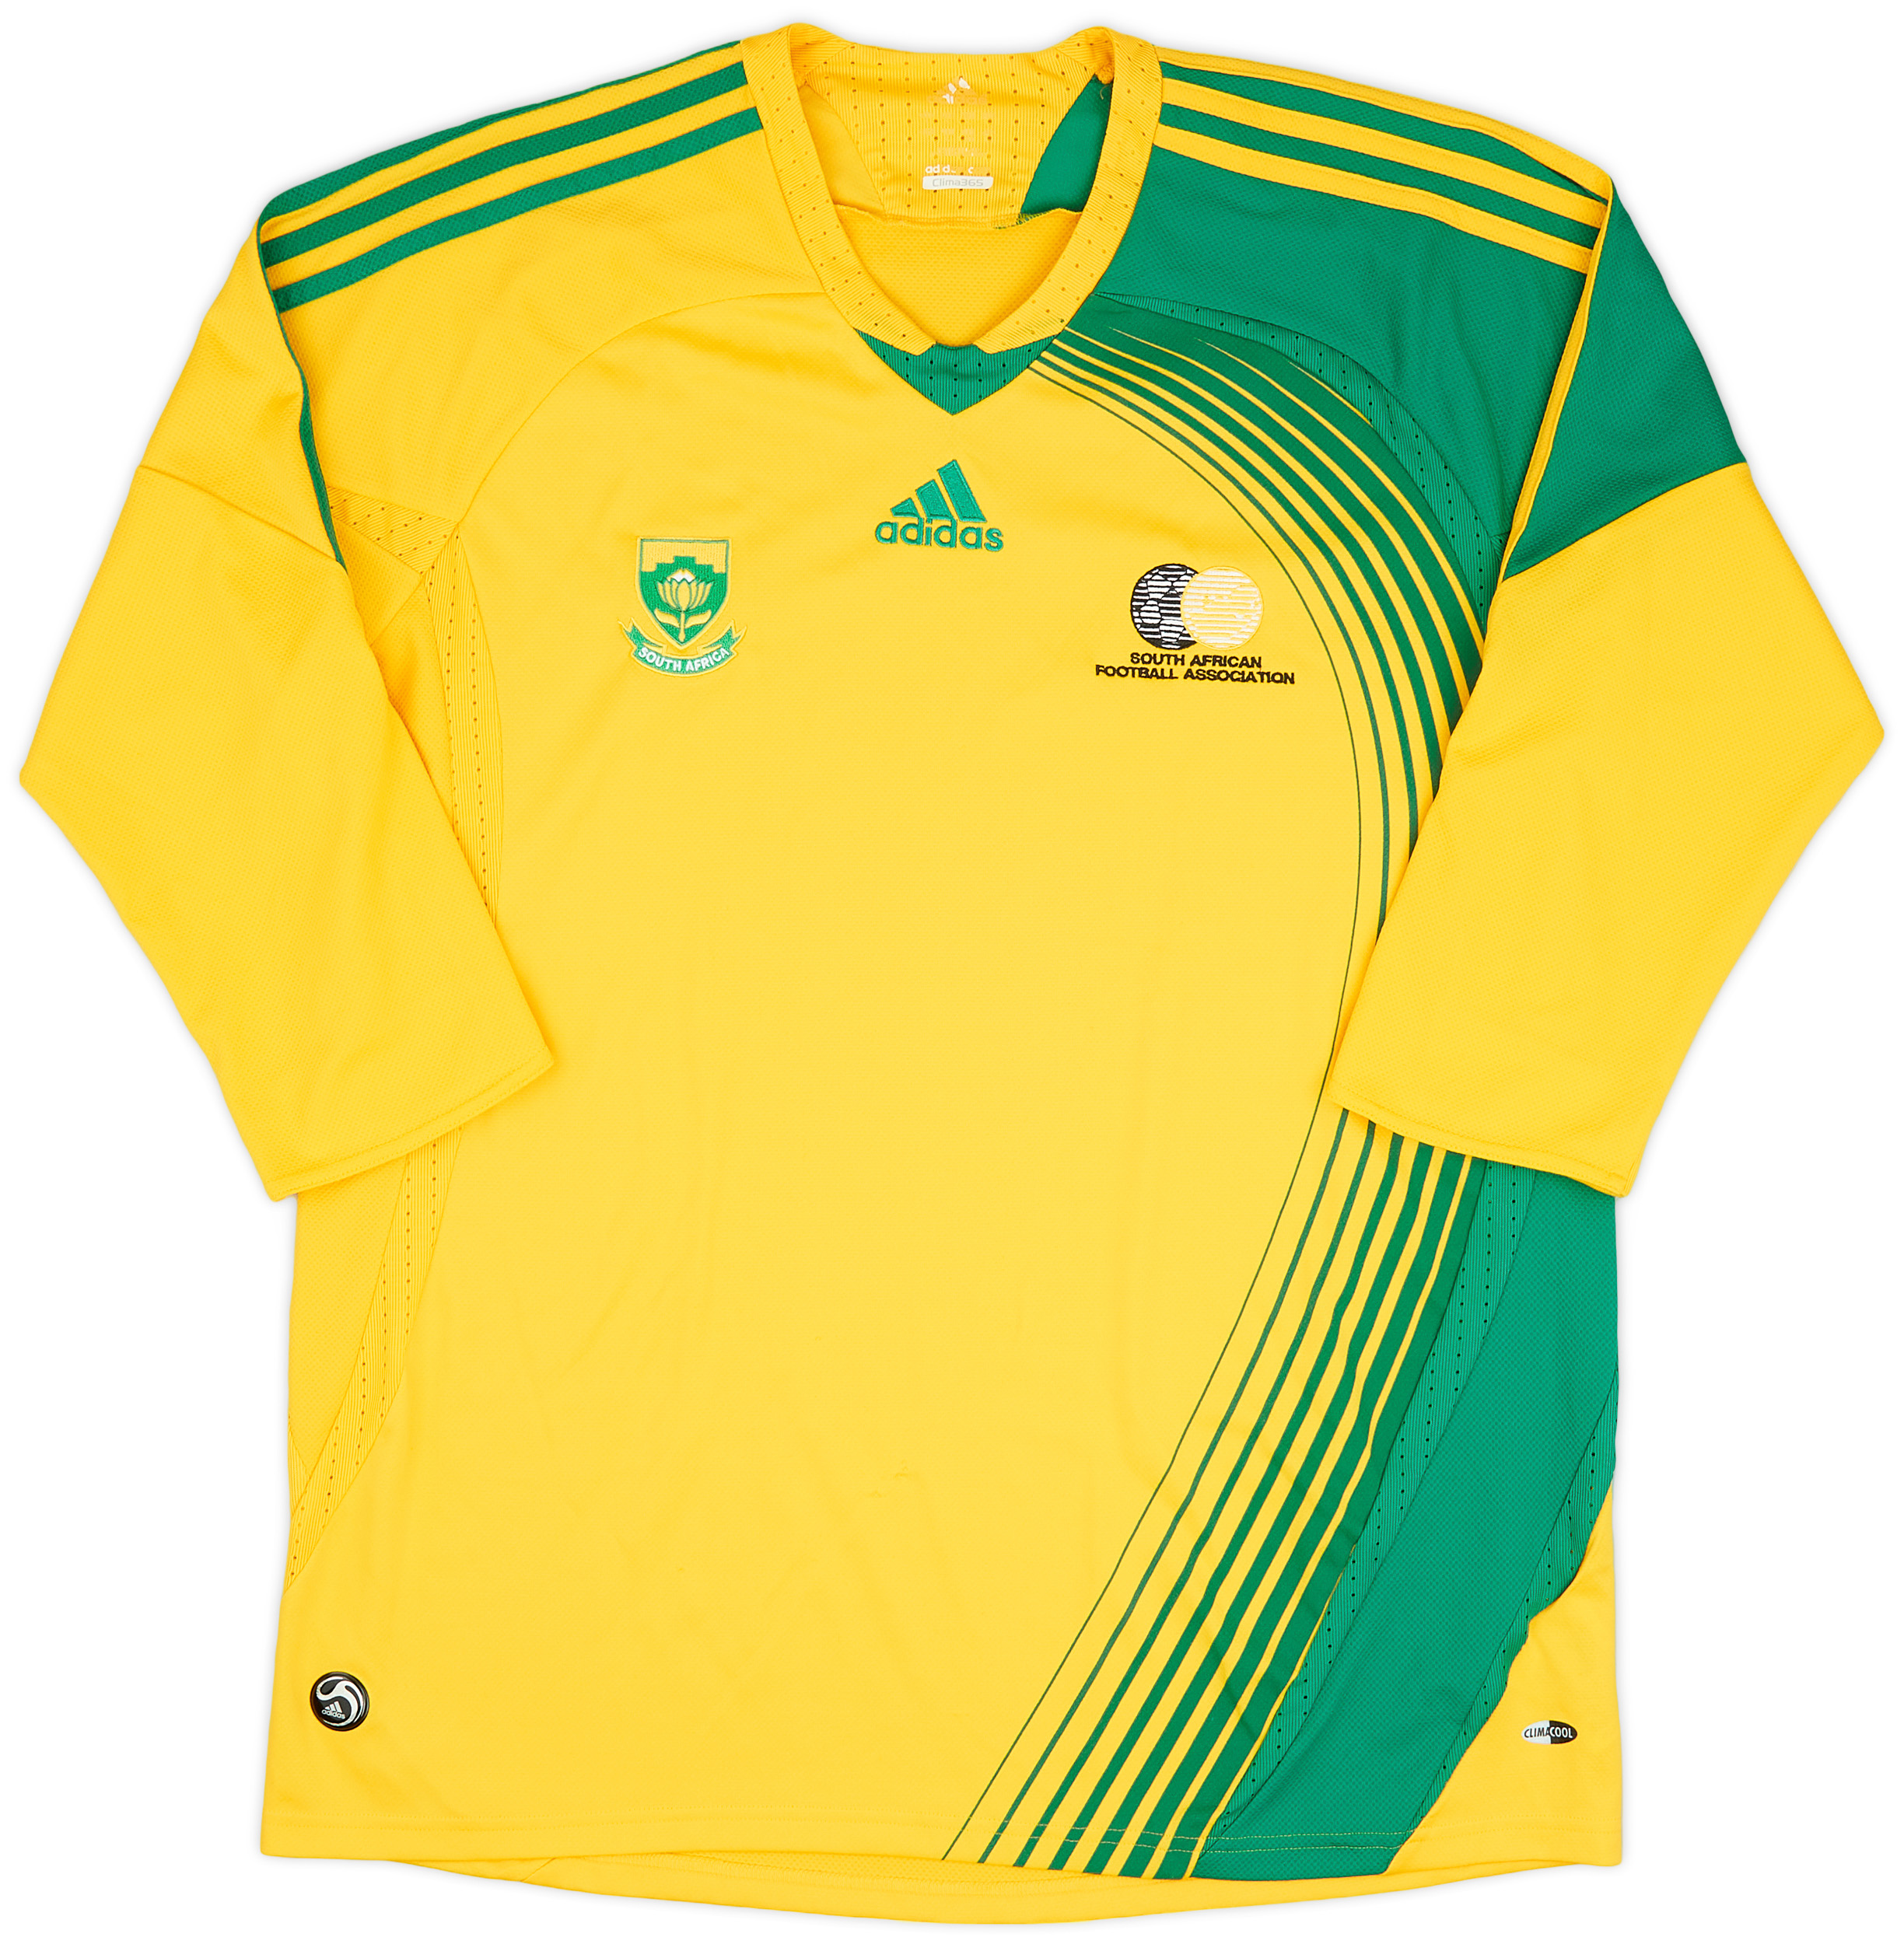 2009-10 South Africa Home Shirt - 8/10 - ()